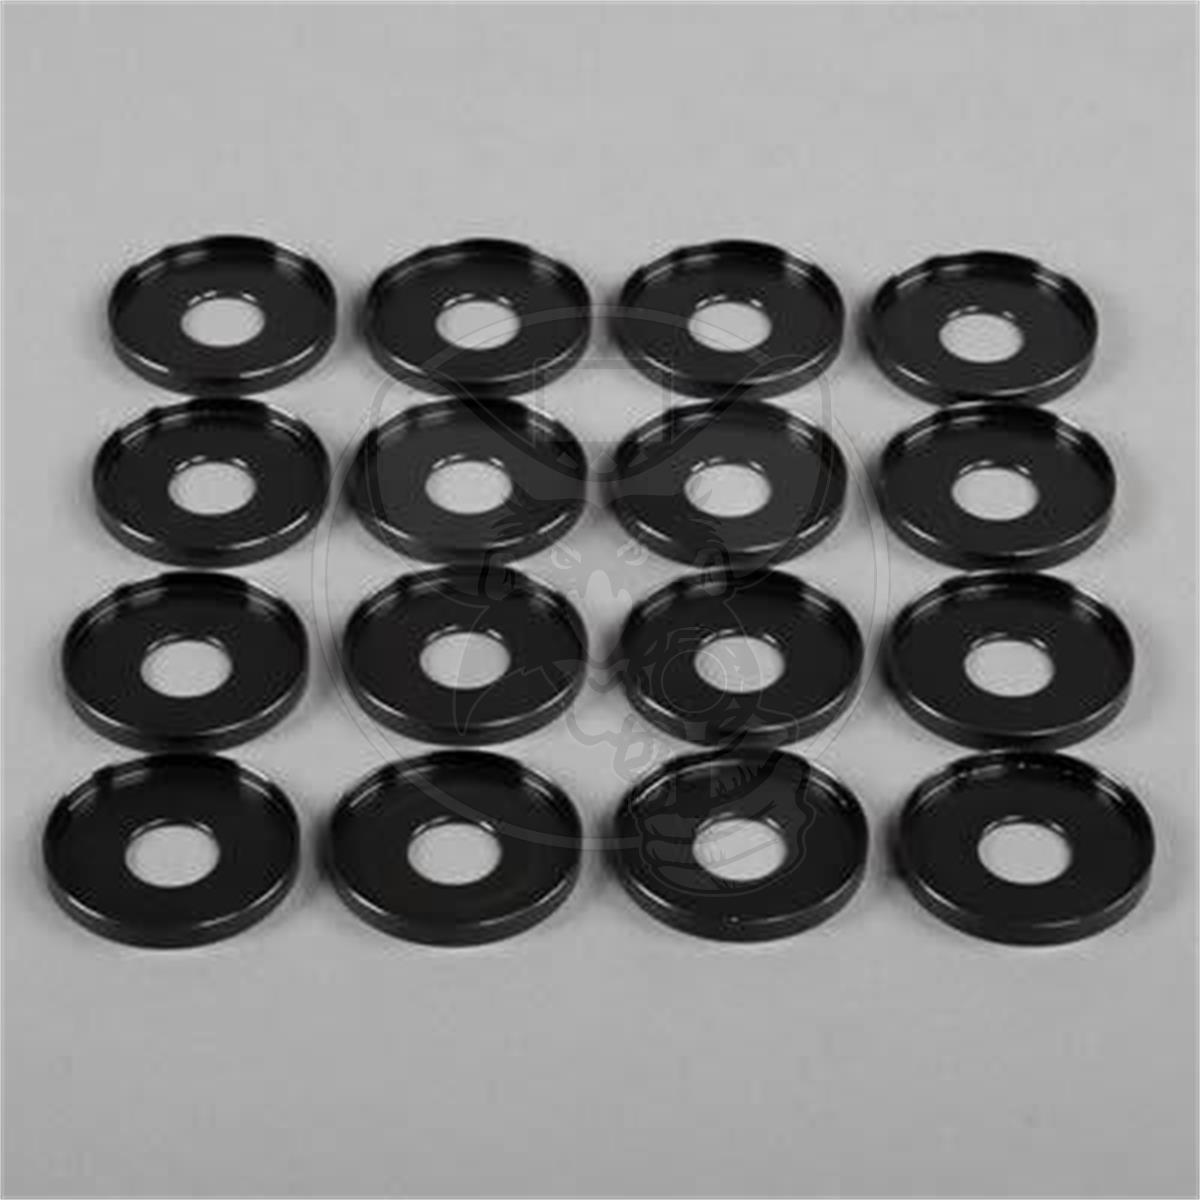 Manley 42446-16 I.D Valve Spring Cup Locators For 1.400" Springs Set Of 16